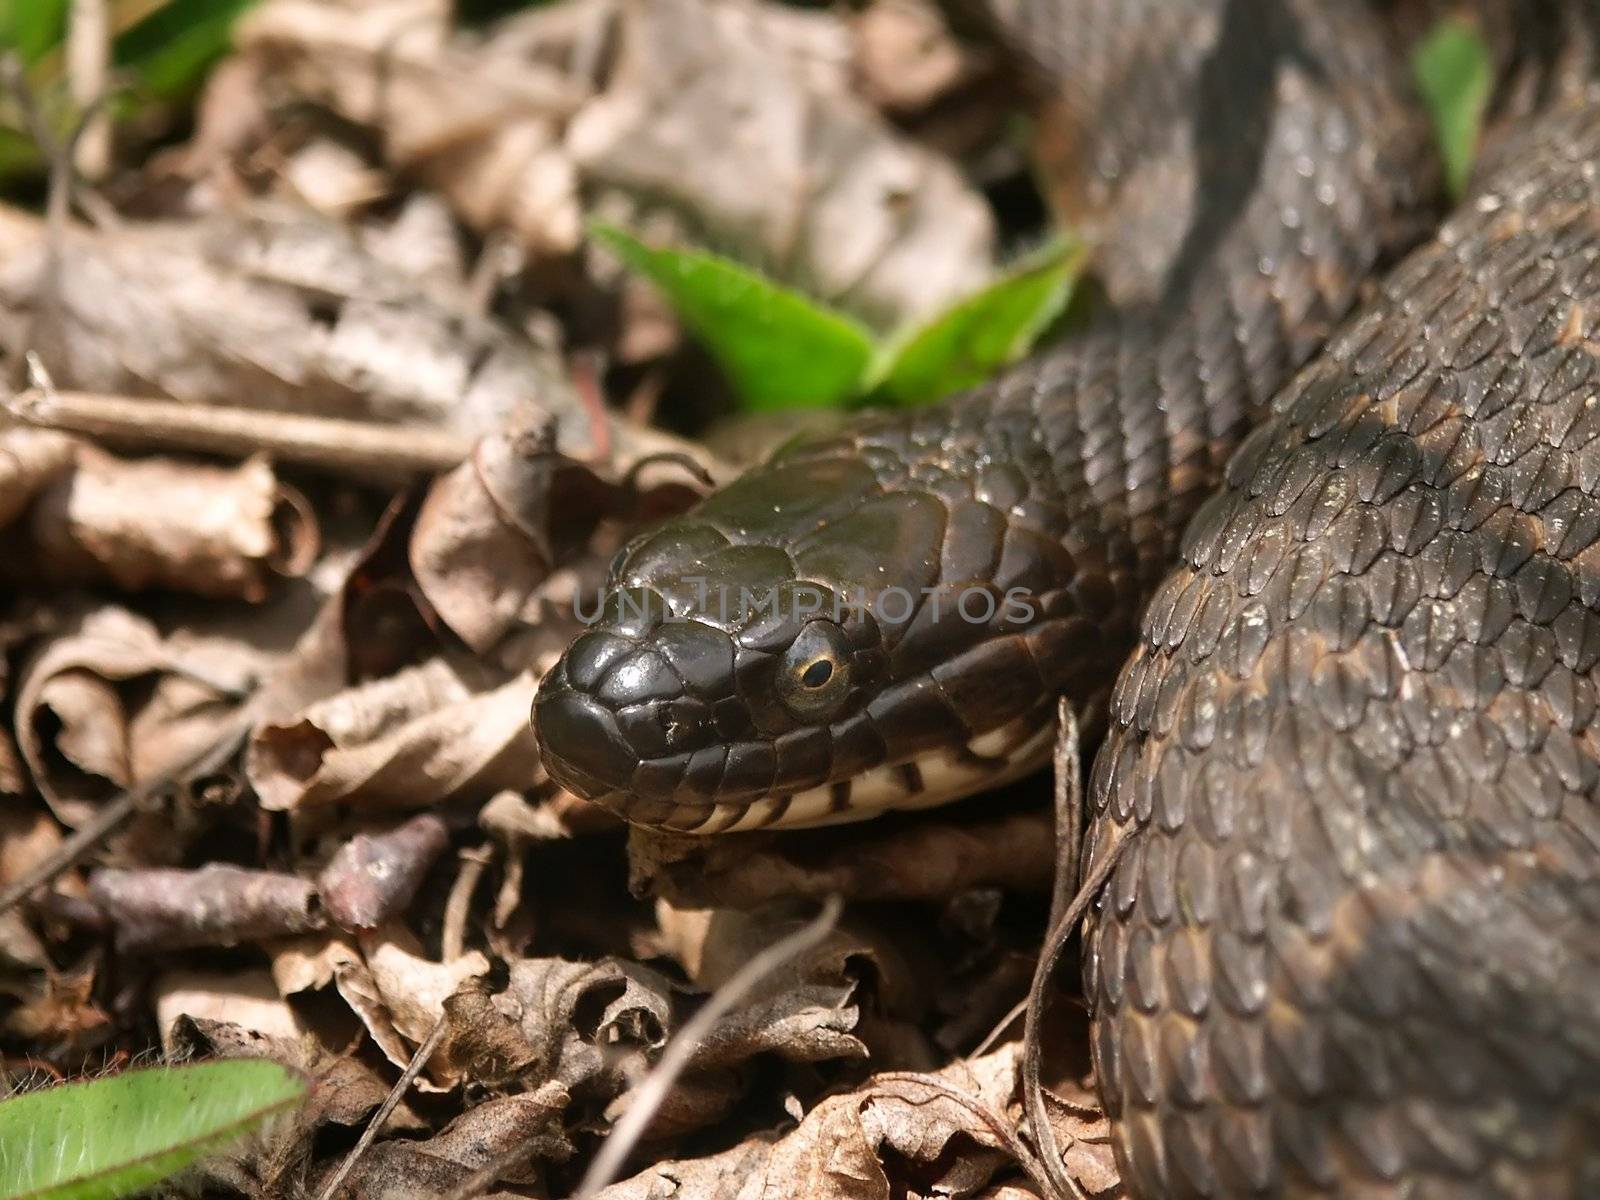 A Northern Watersnake (Nerodia sipedon) off the Bearskin trail in the northwoods of Wisconsin.